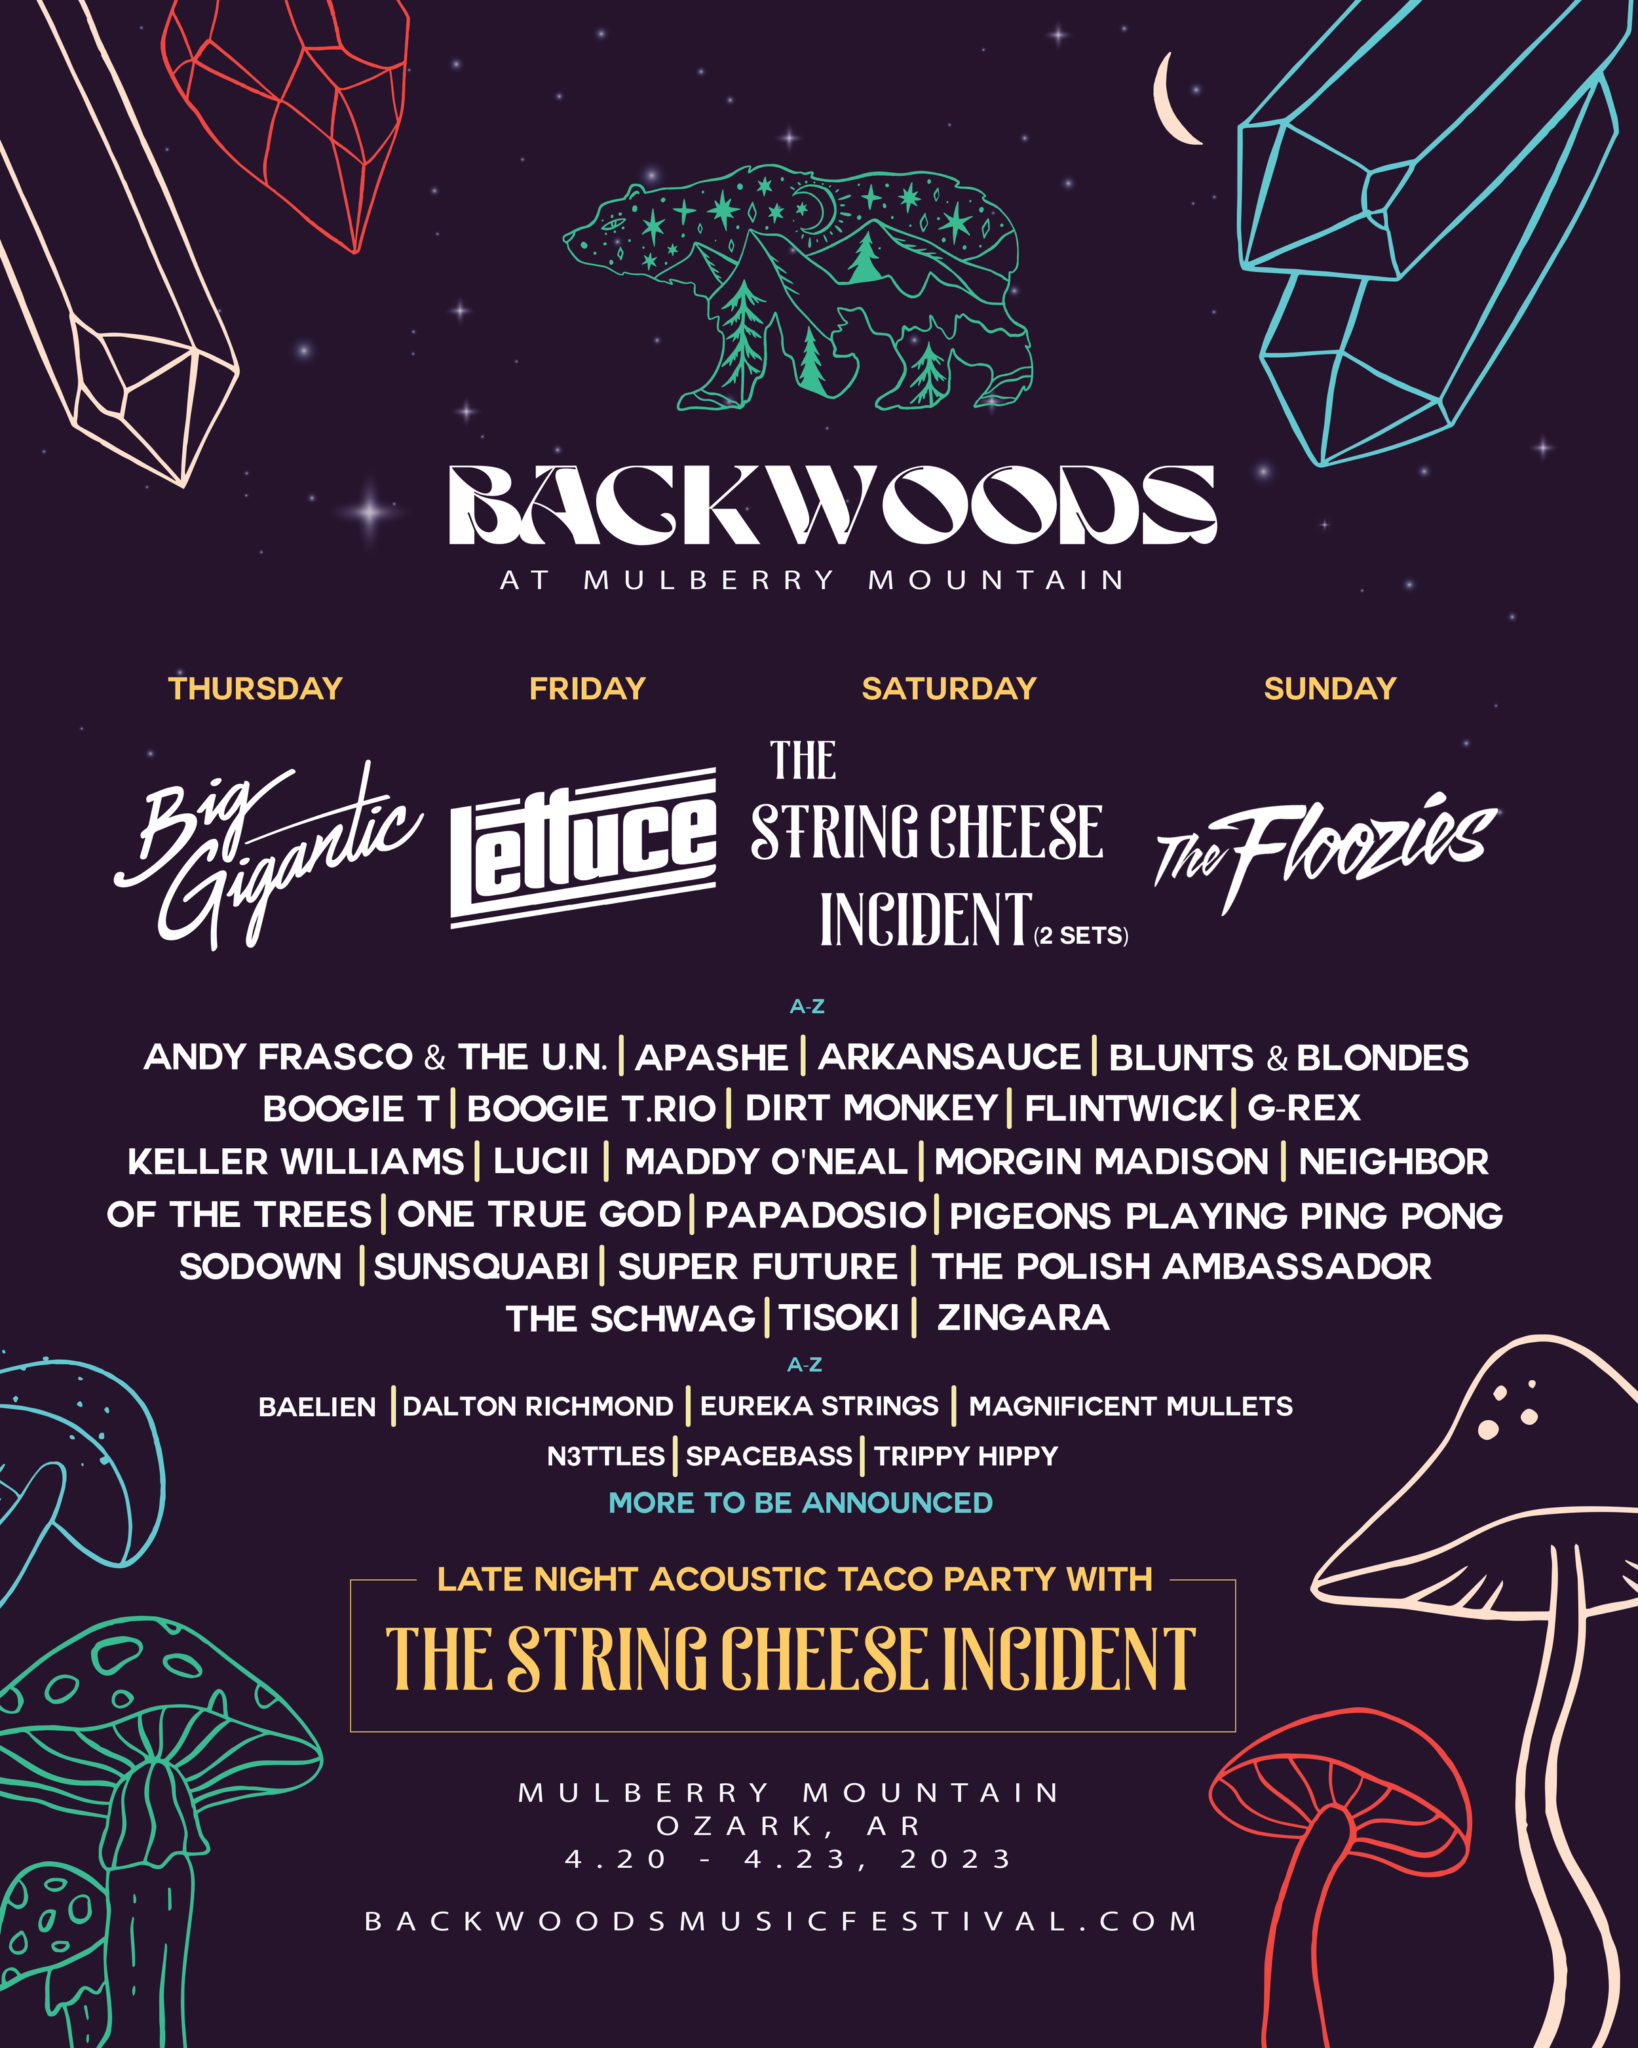 Festival Backwoods at Mulberry Mountain Ozark, Ark. tickets and